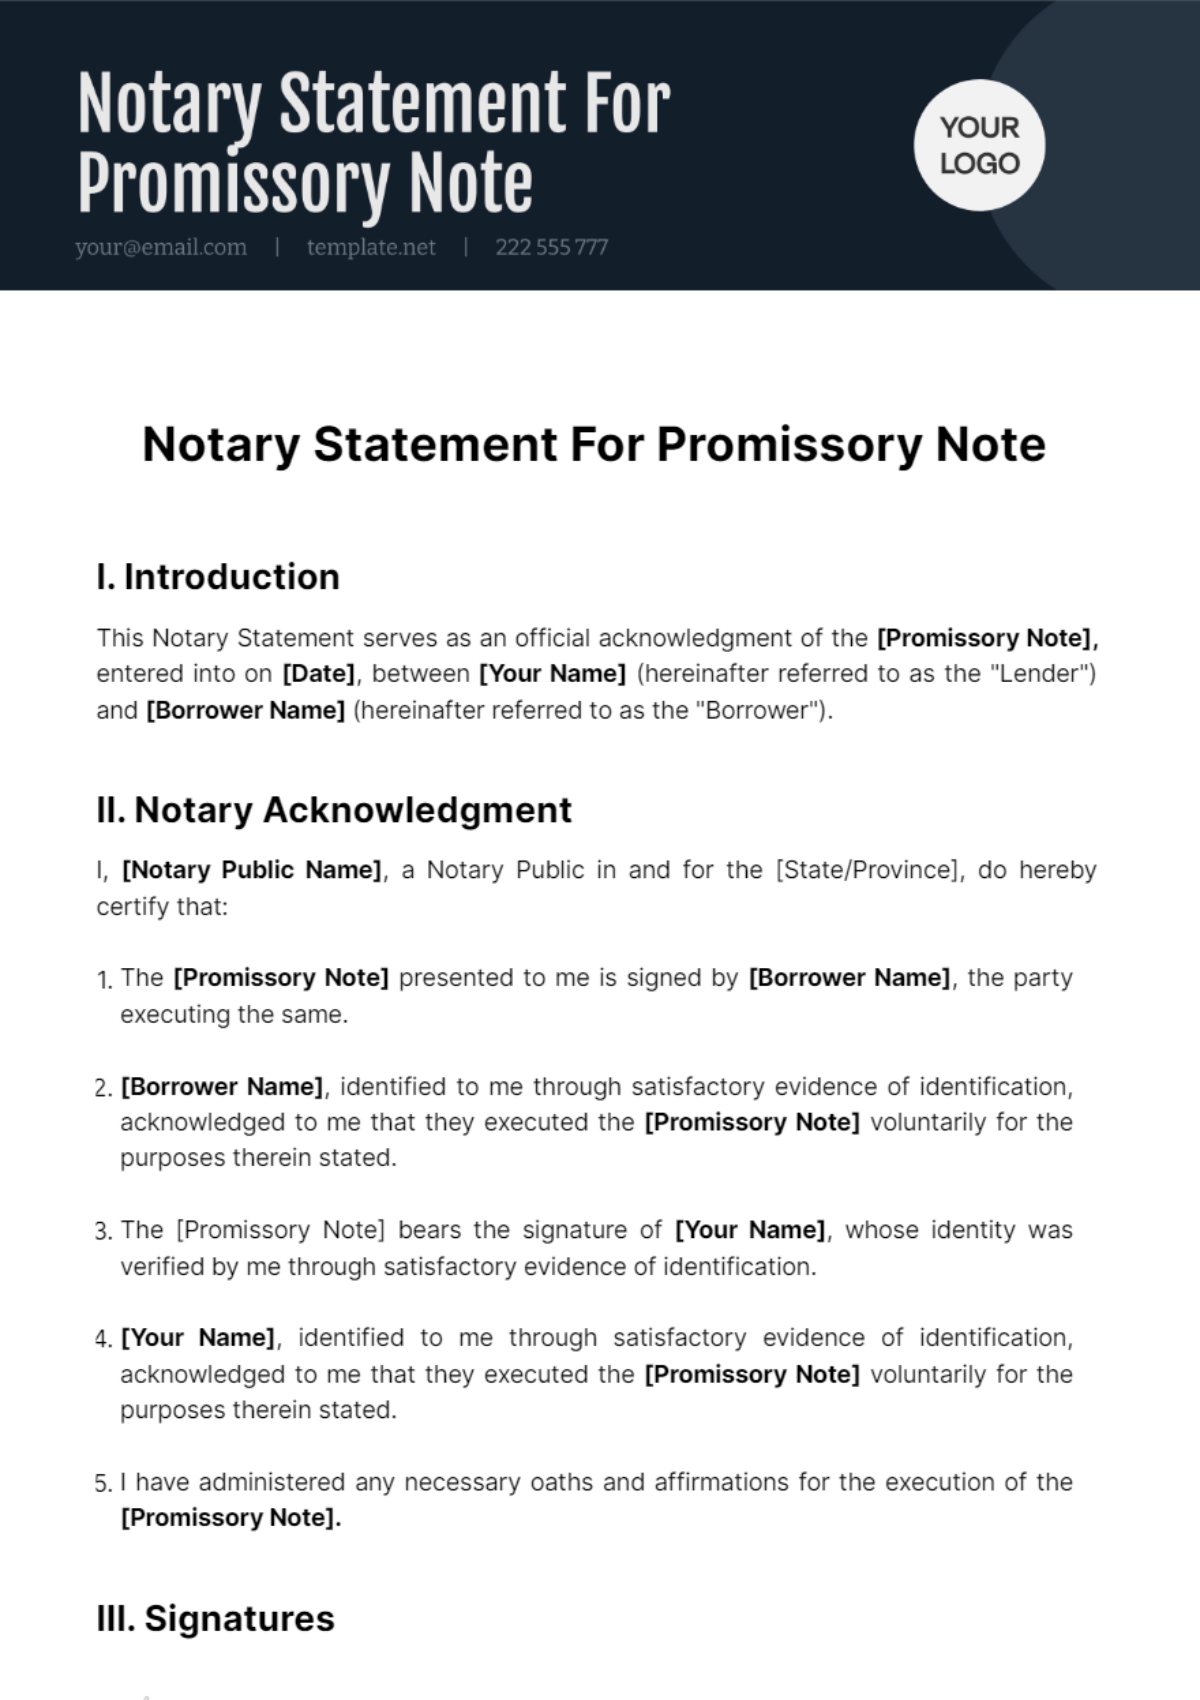 Notary Statement For Promissory Note Template